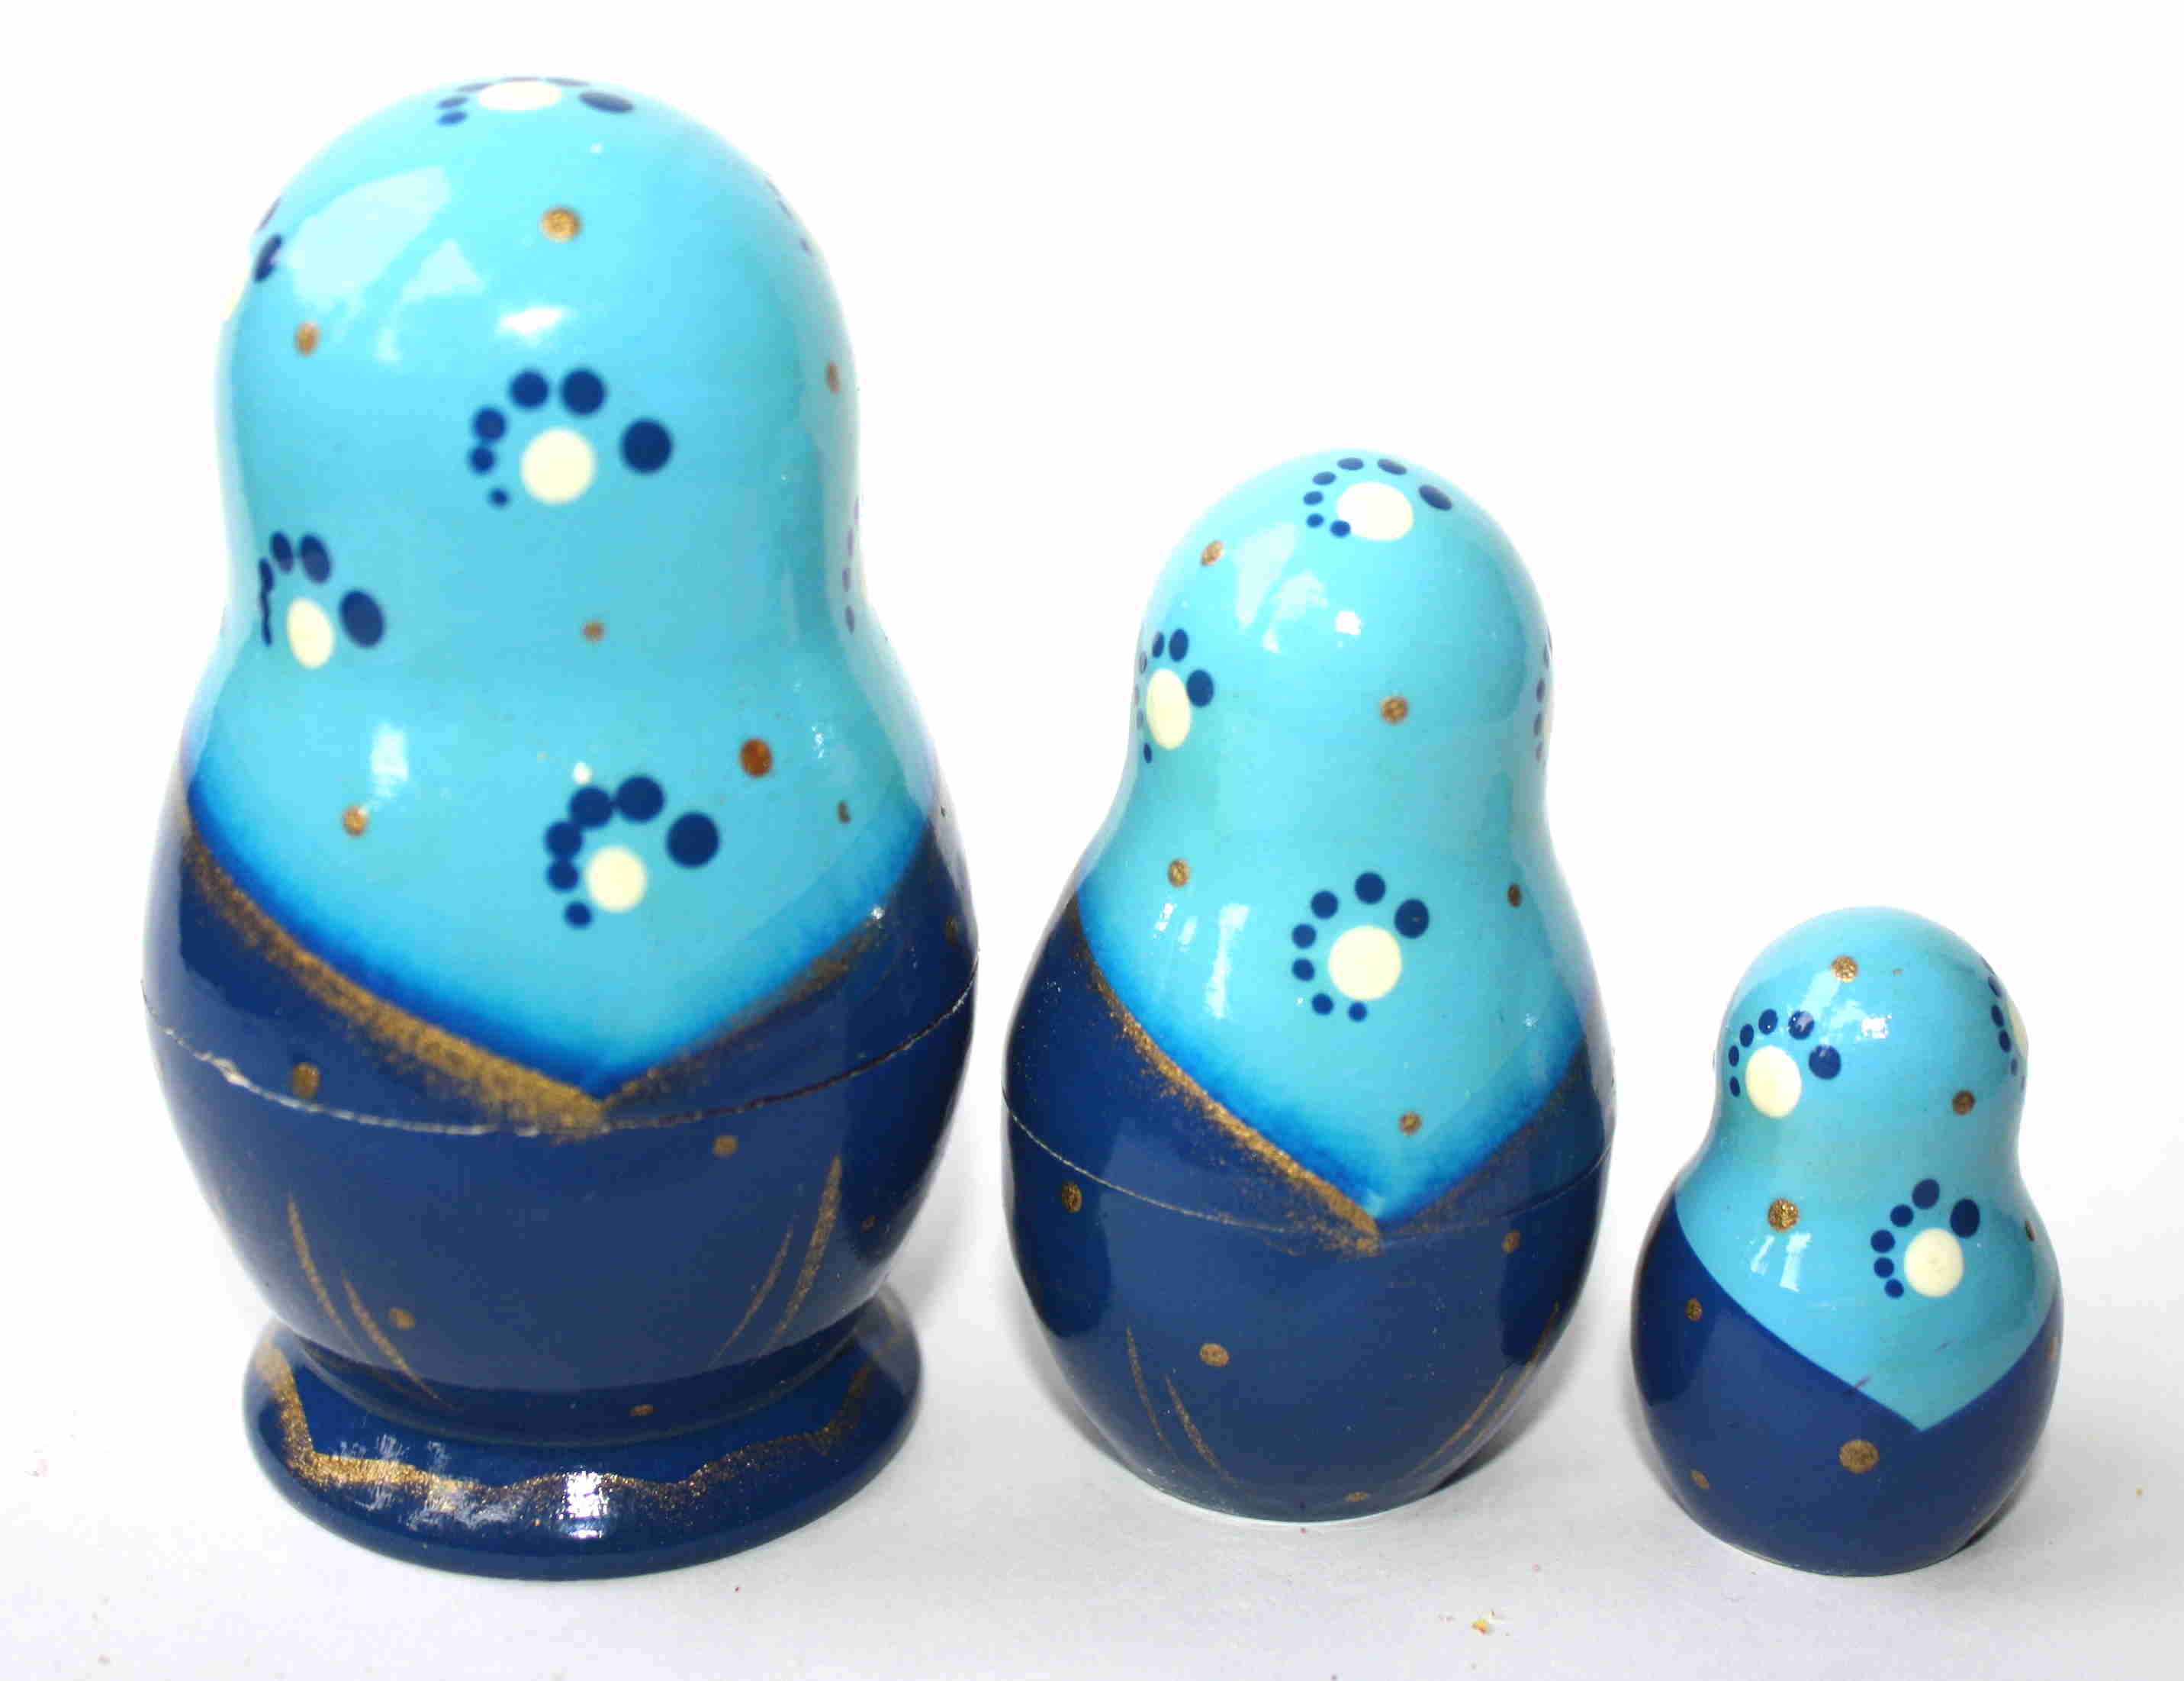 Artists Matryoshka Blue woman with blue shawl and candle (3 nested set)